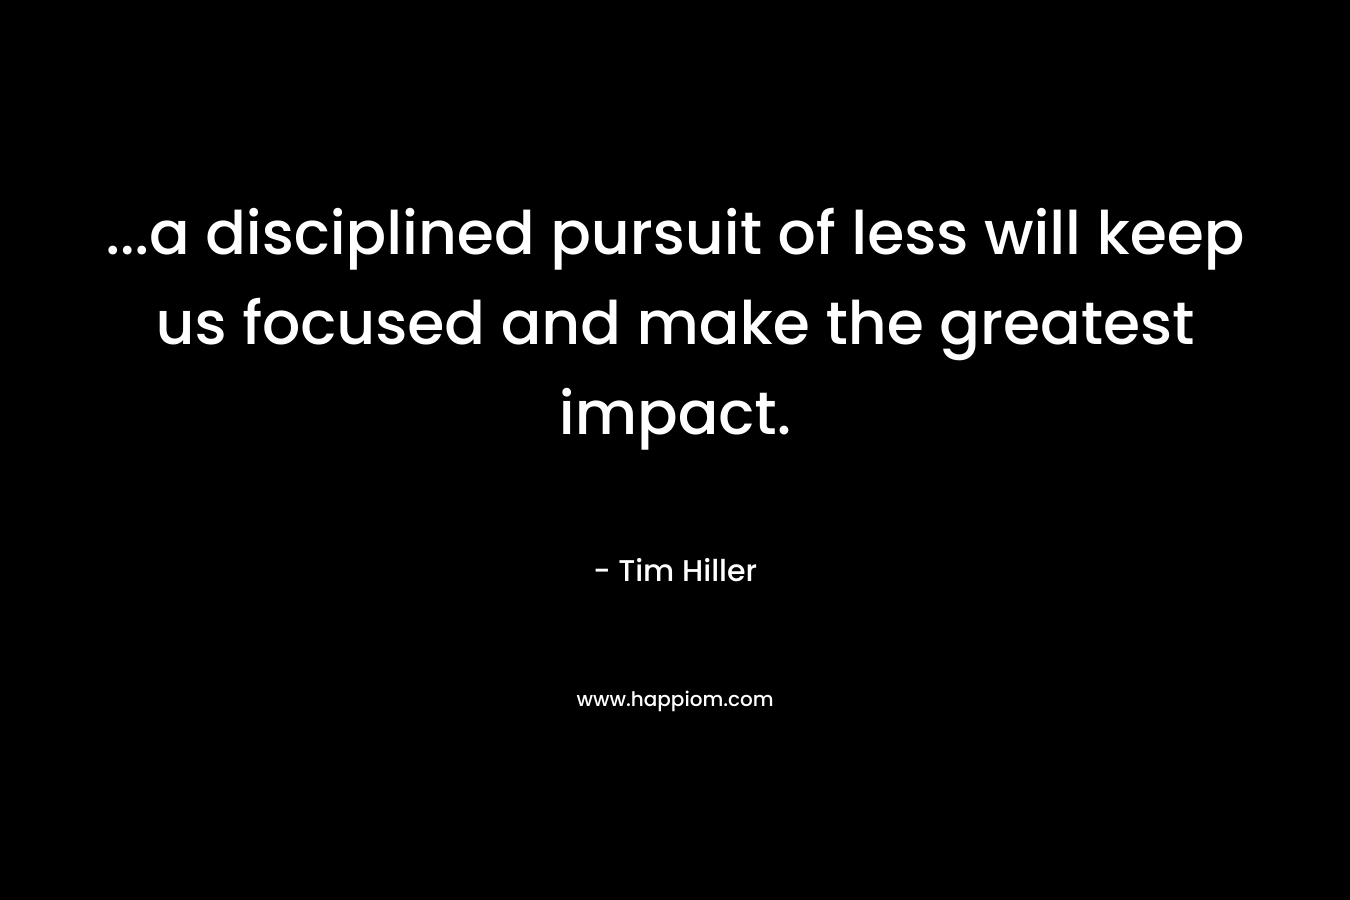 ...a disciplined pursuit of less will keep us focused and make the greatest impact.